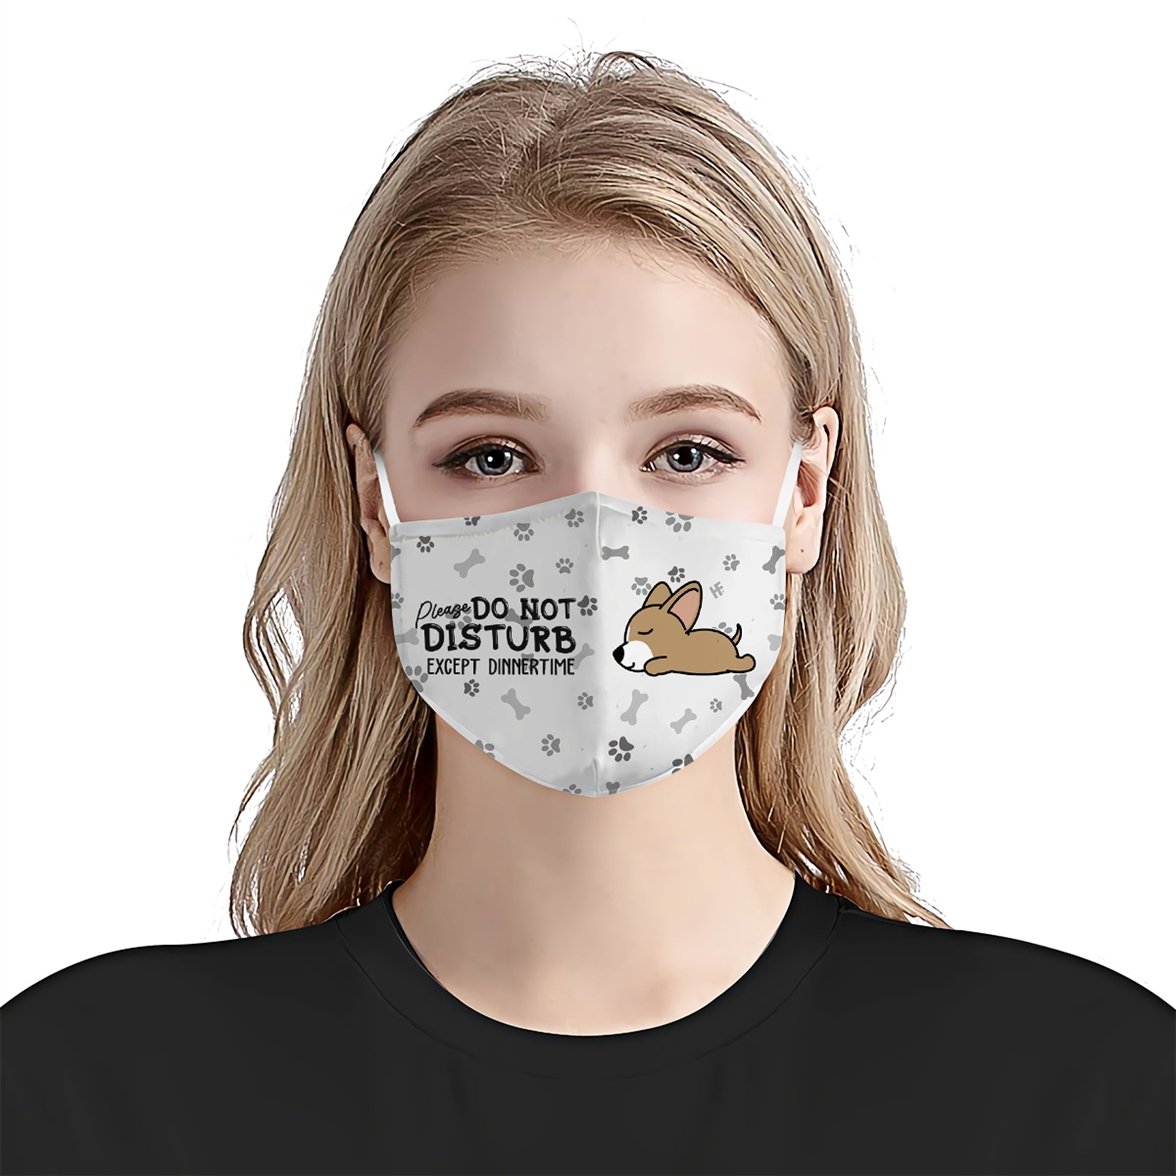 Please Do Not Disturb Except Dinnertime Chihuahua White EZ16 0807 Face Mask